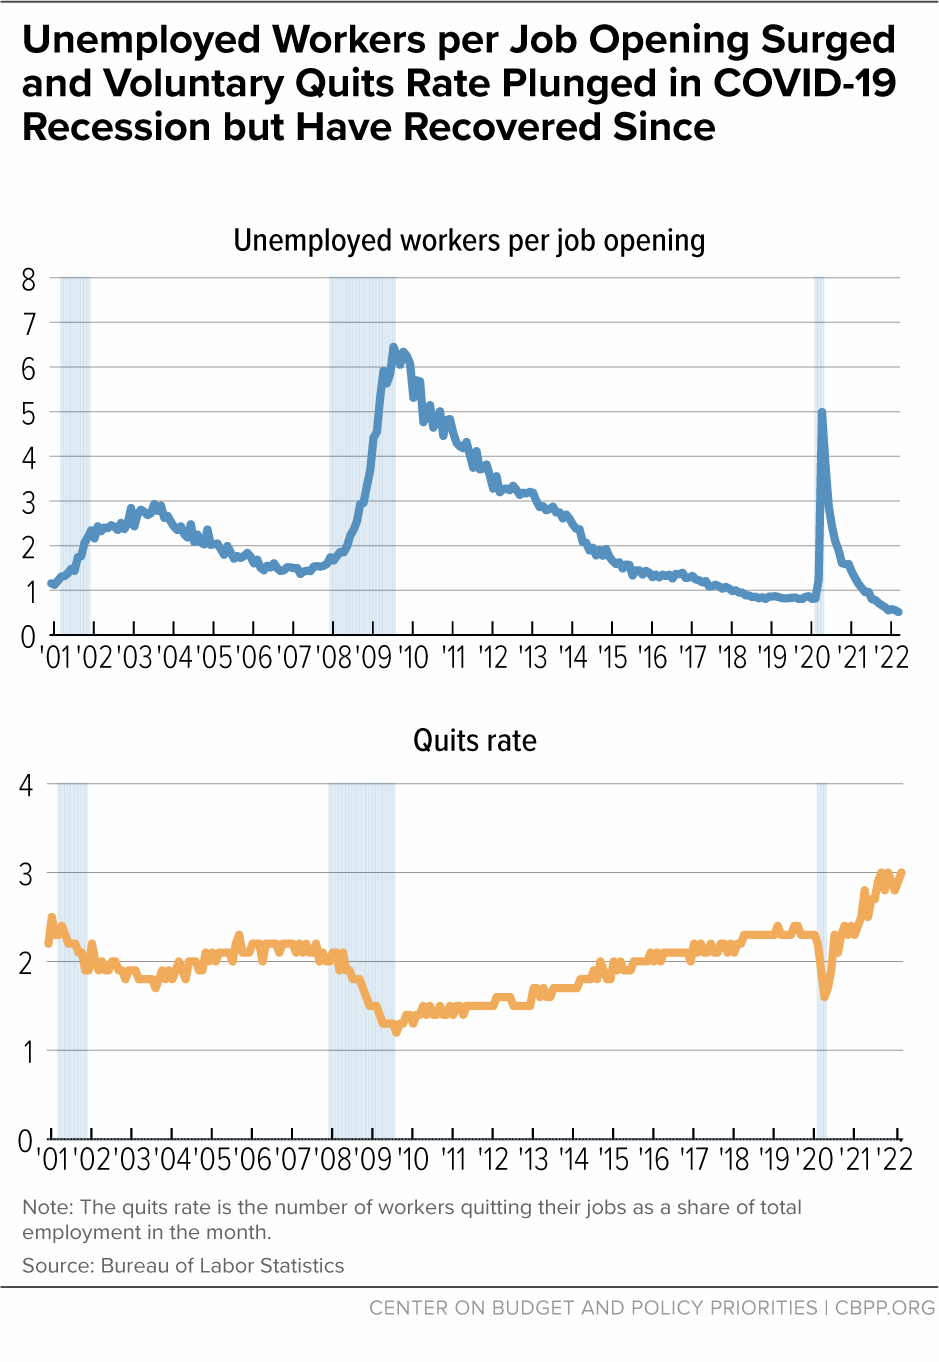 Unemployed Workers per Job Opening Surged and Voluntary Quits Rate Plunged in COVID-19 Recession but Have Been Recovering Since